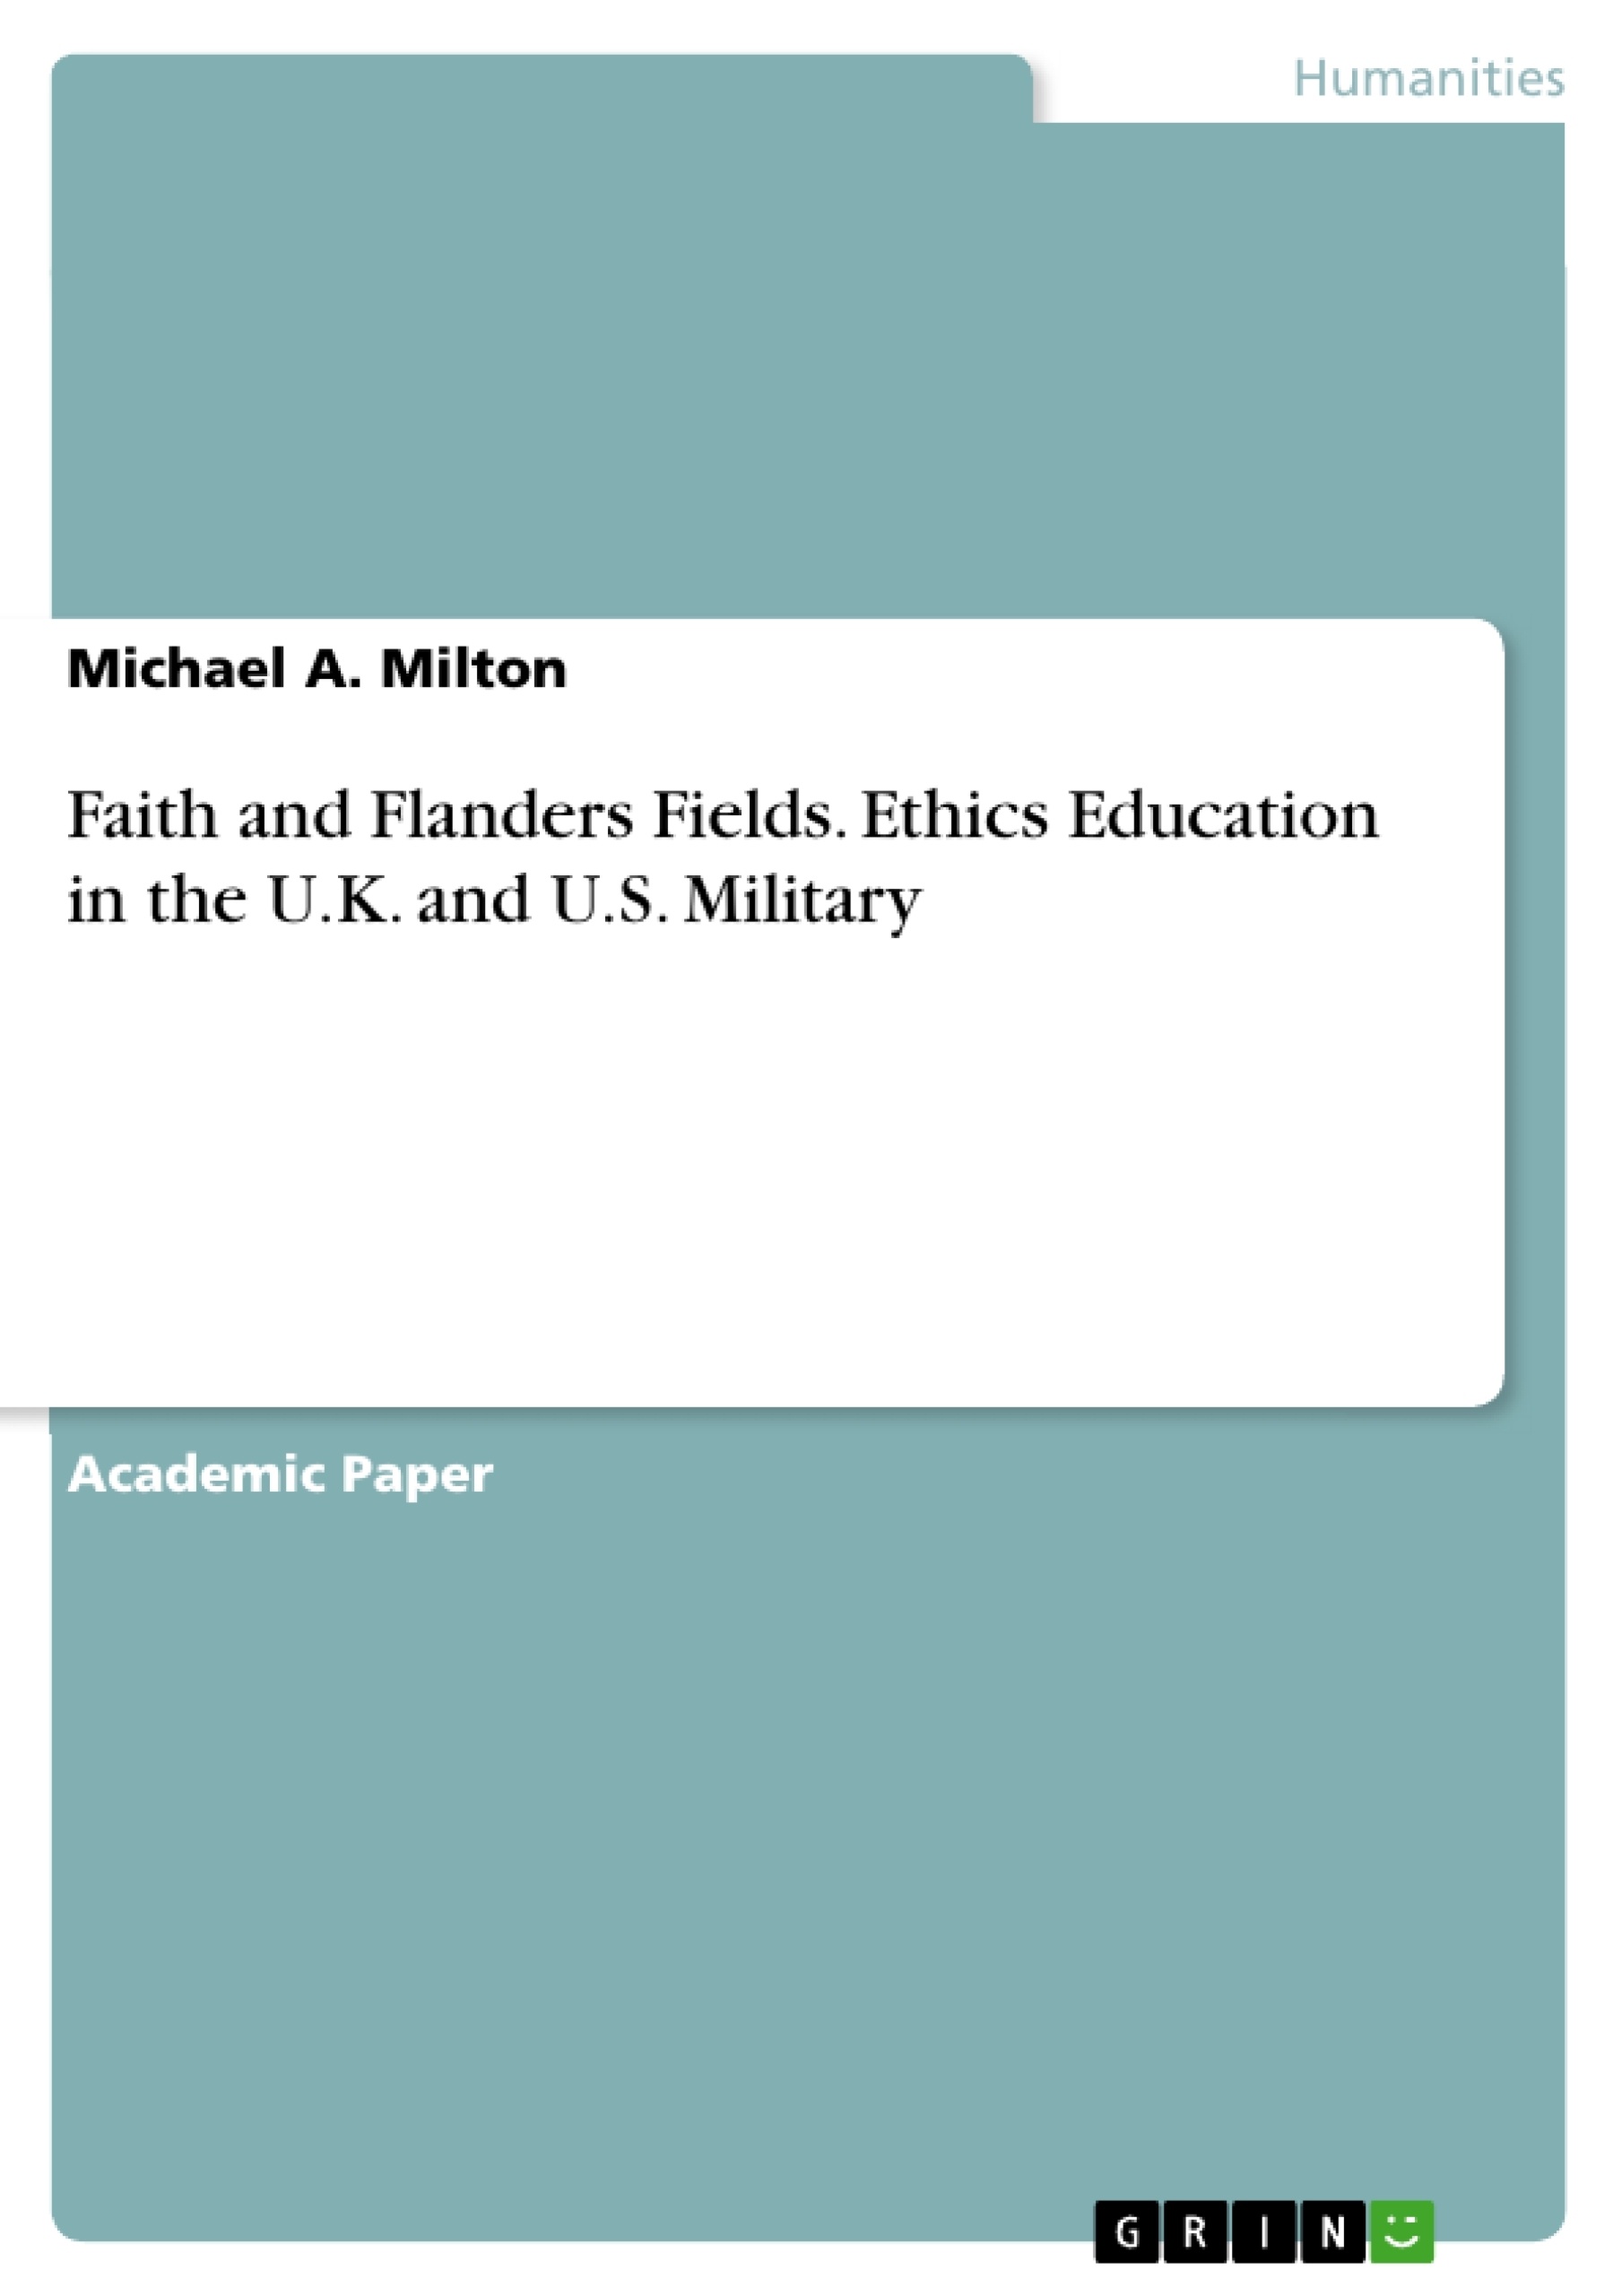 Título: Faith and Flanders Fields. Ethics Education in the U.K. and U.S. Military